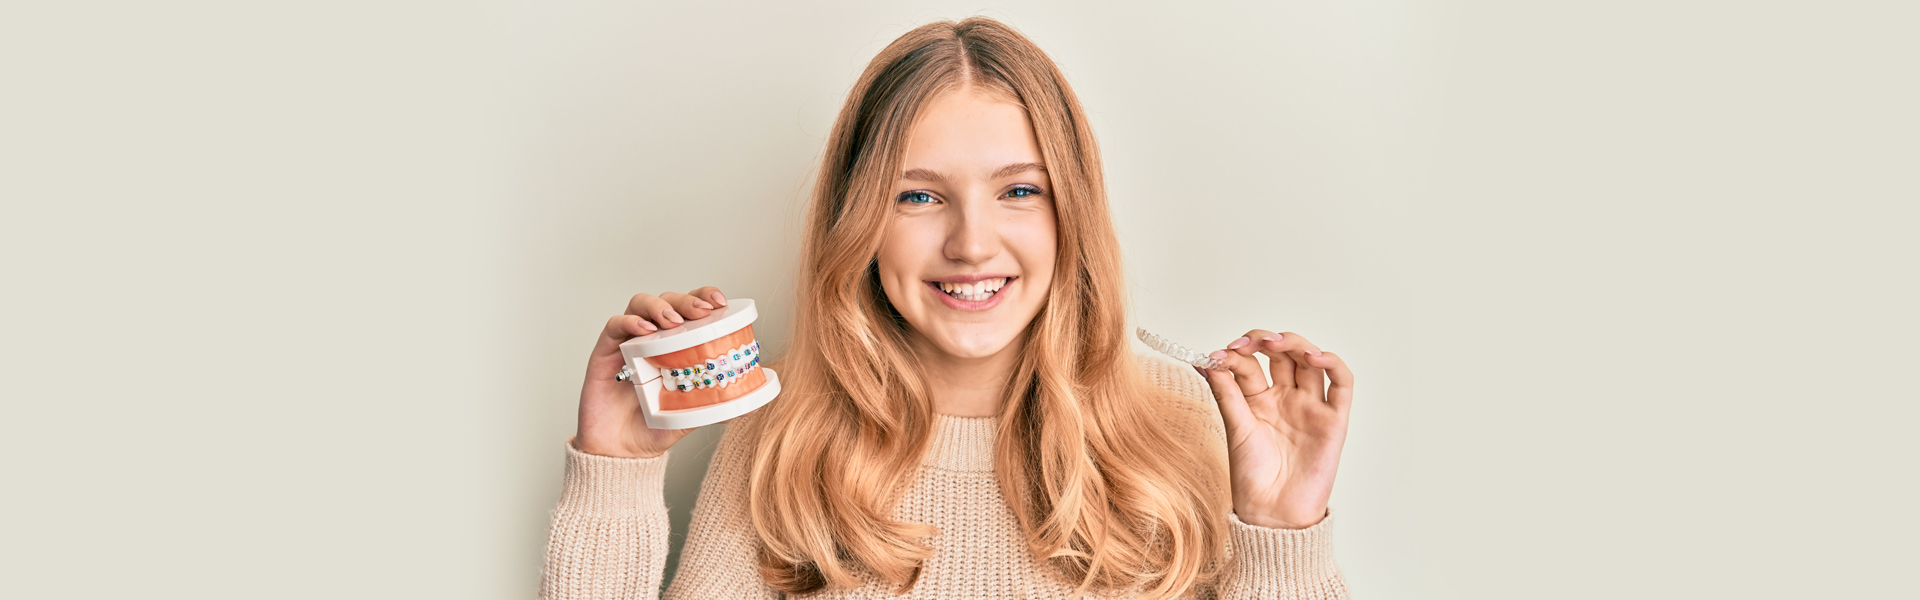 Metal Free Options for Straightening Teeth: Benefits of Invisalign over Braces